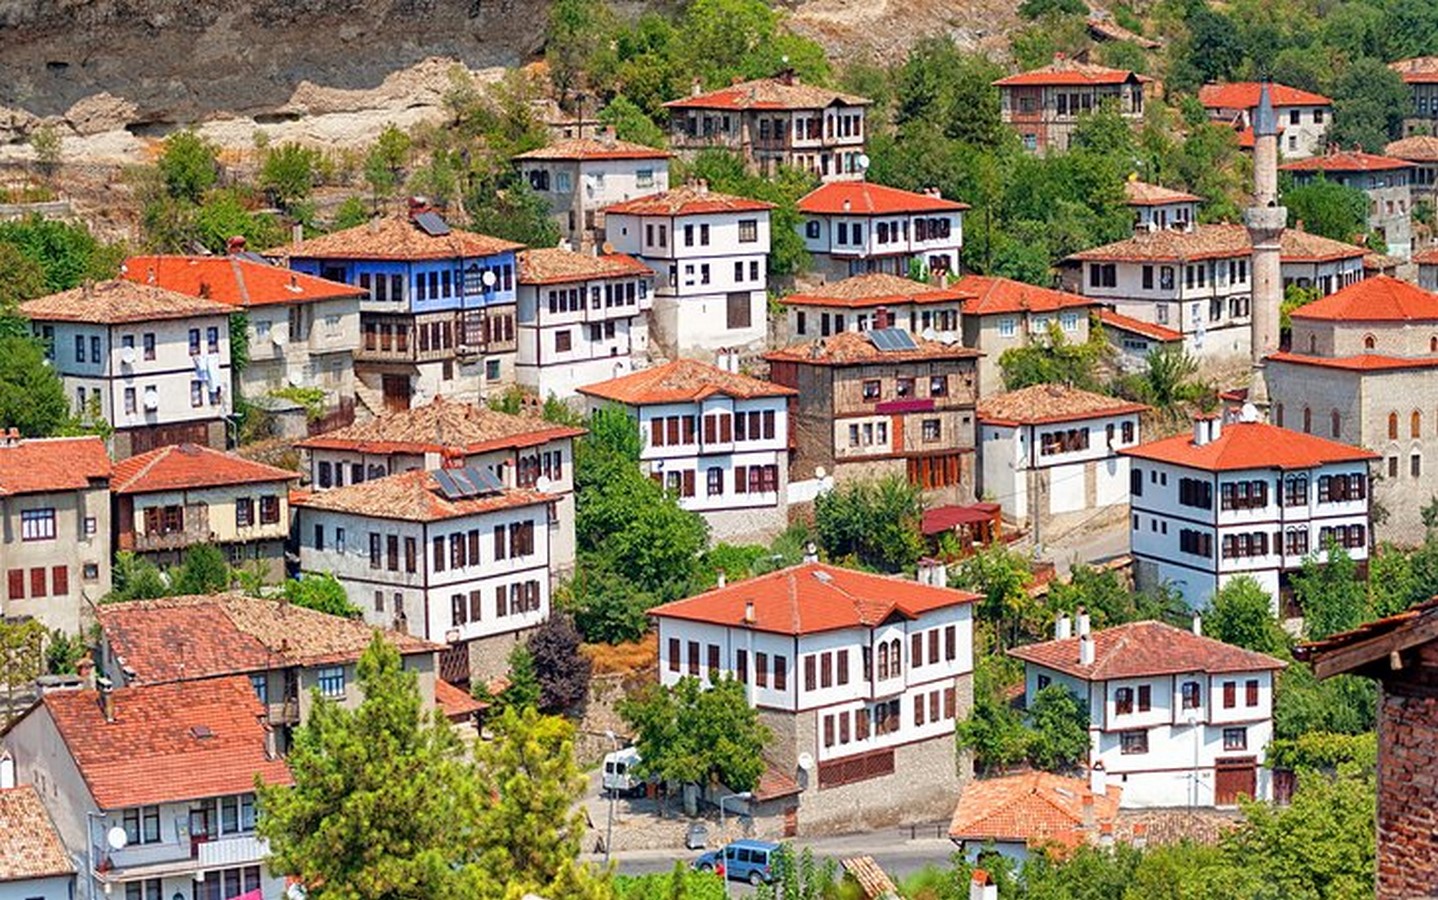 An overview of Turkish vernacular architecture - Sheet8